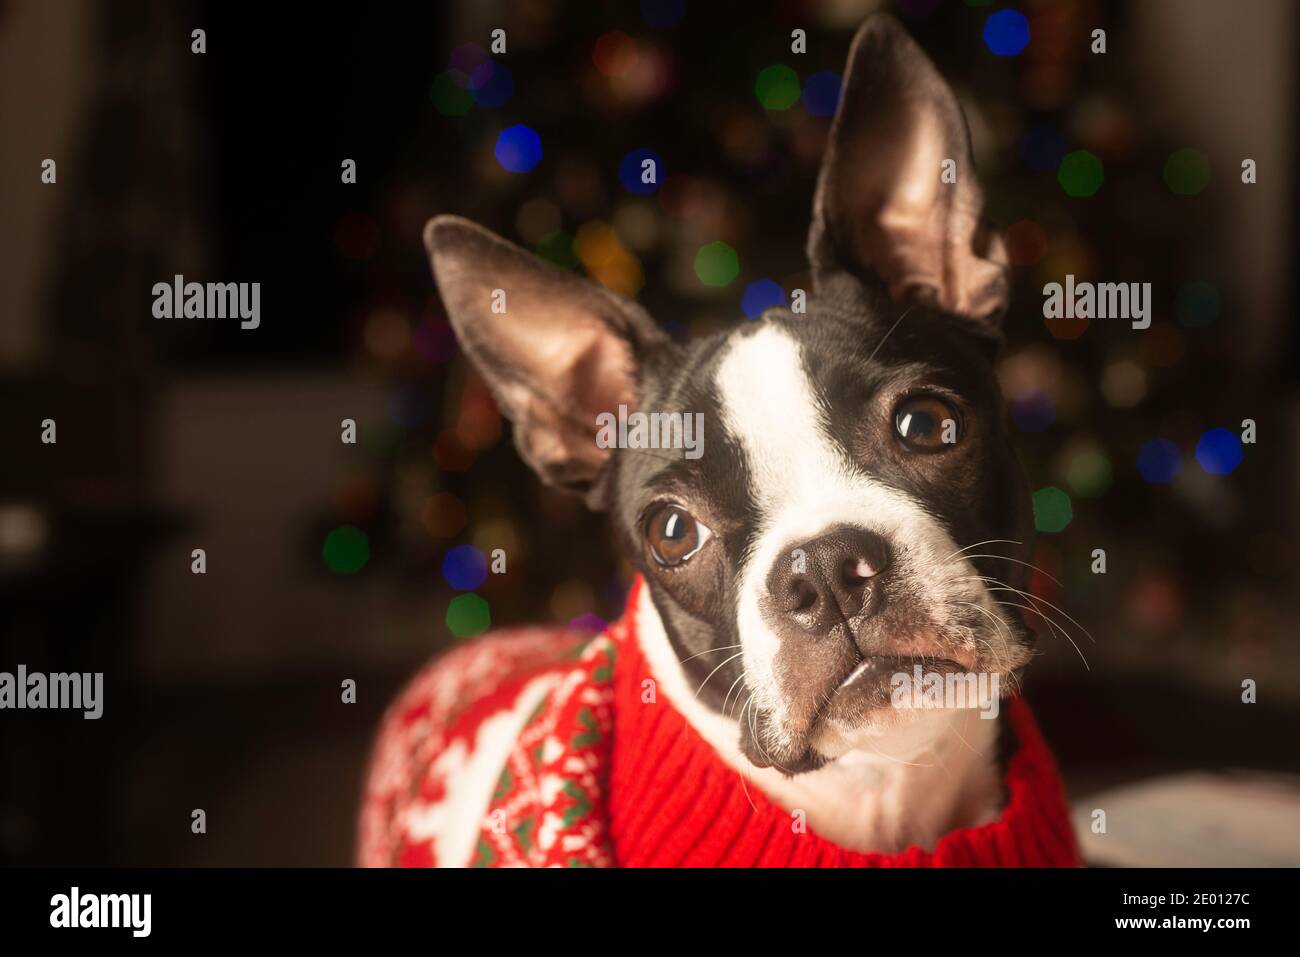 Boston Terrier Puppy Dressed Up for Christmas in Holiday Sweater Stock Photo